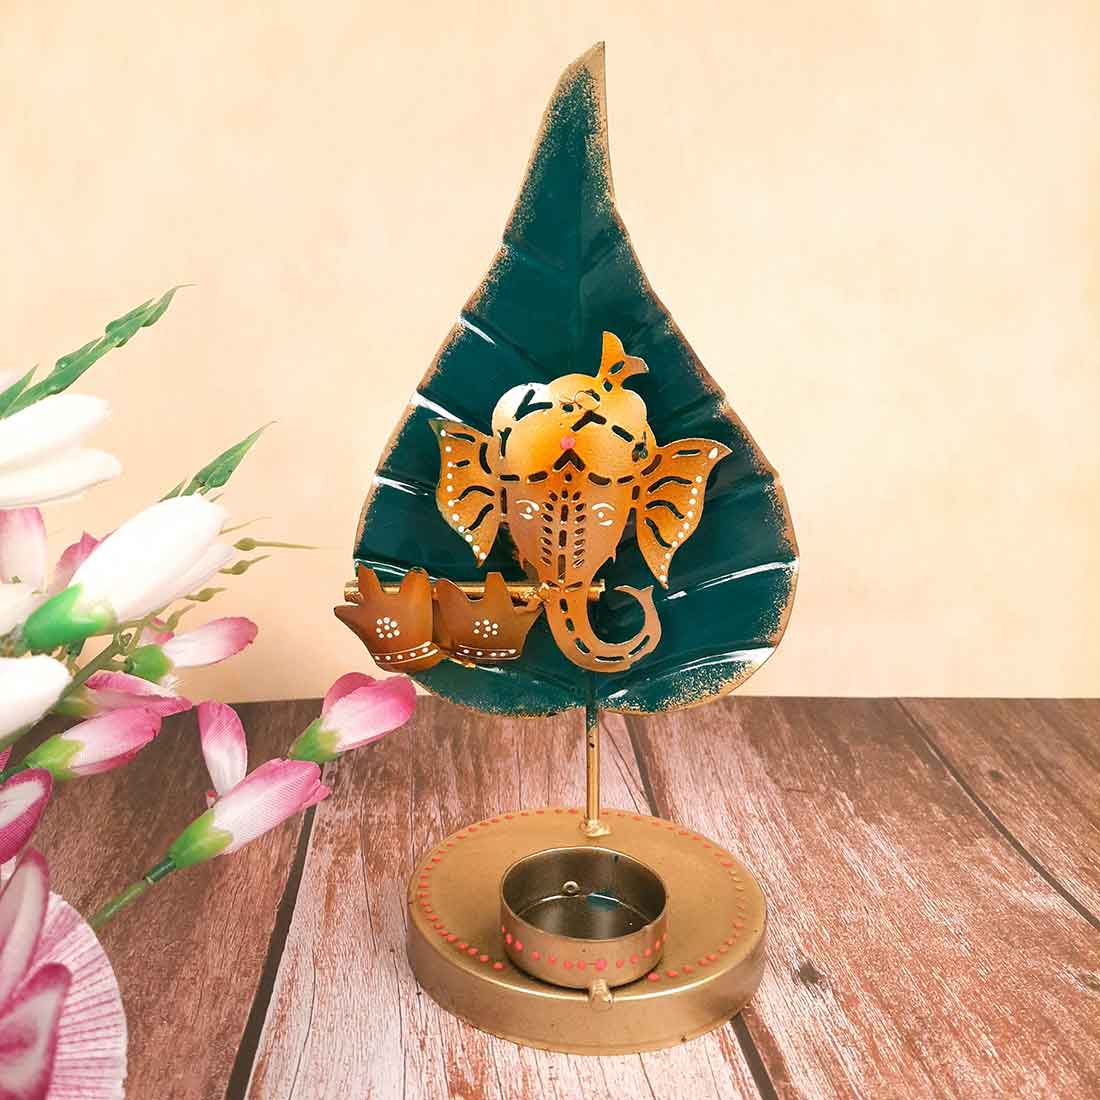 Tea Light Holder Antique | Candle Holders Stand With One Slots | Tea Light Candle Stands - Ganesha Design - For Home, Table, Living Room, Dining room, Bedroom Decor | For Festival Decoration & Gifts - 13 Inch